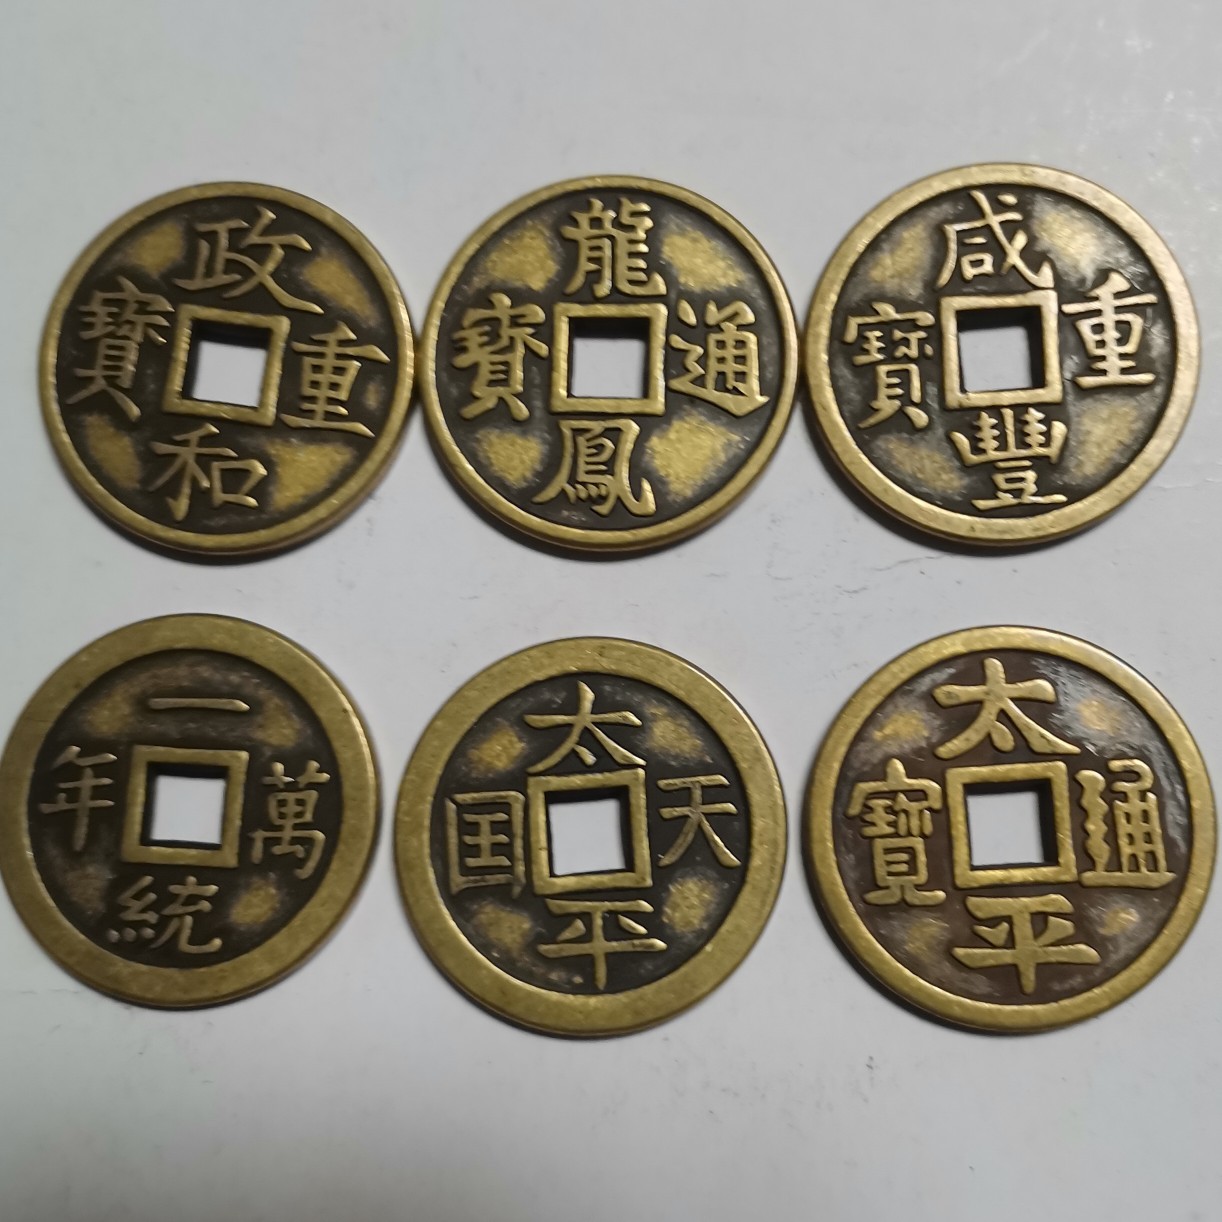 diameter 32mm Thick 3mm Governance Treasures Taiping San Bao Pacific Reign Dominate Dragon Phoenix Reign